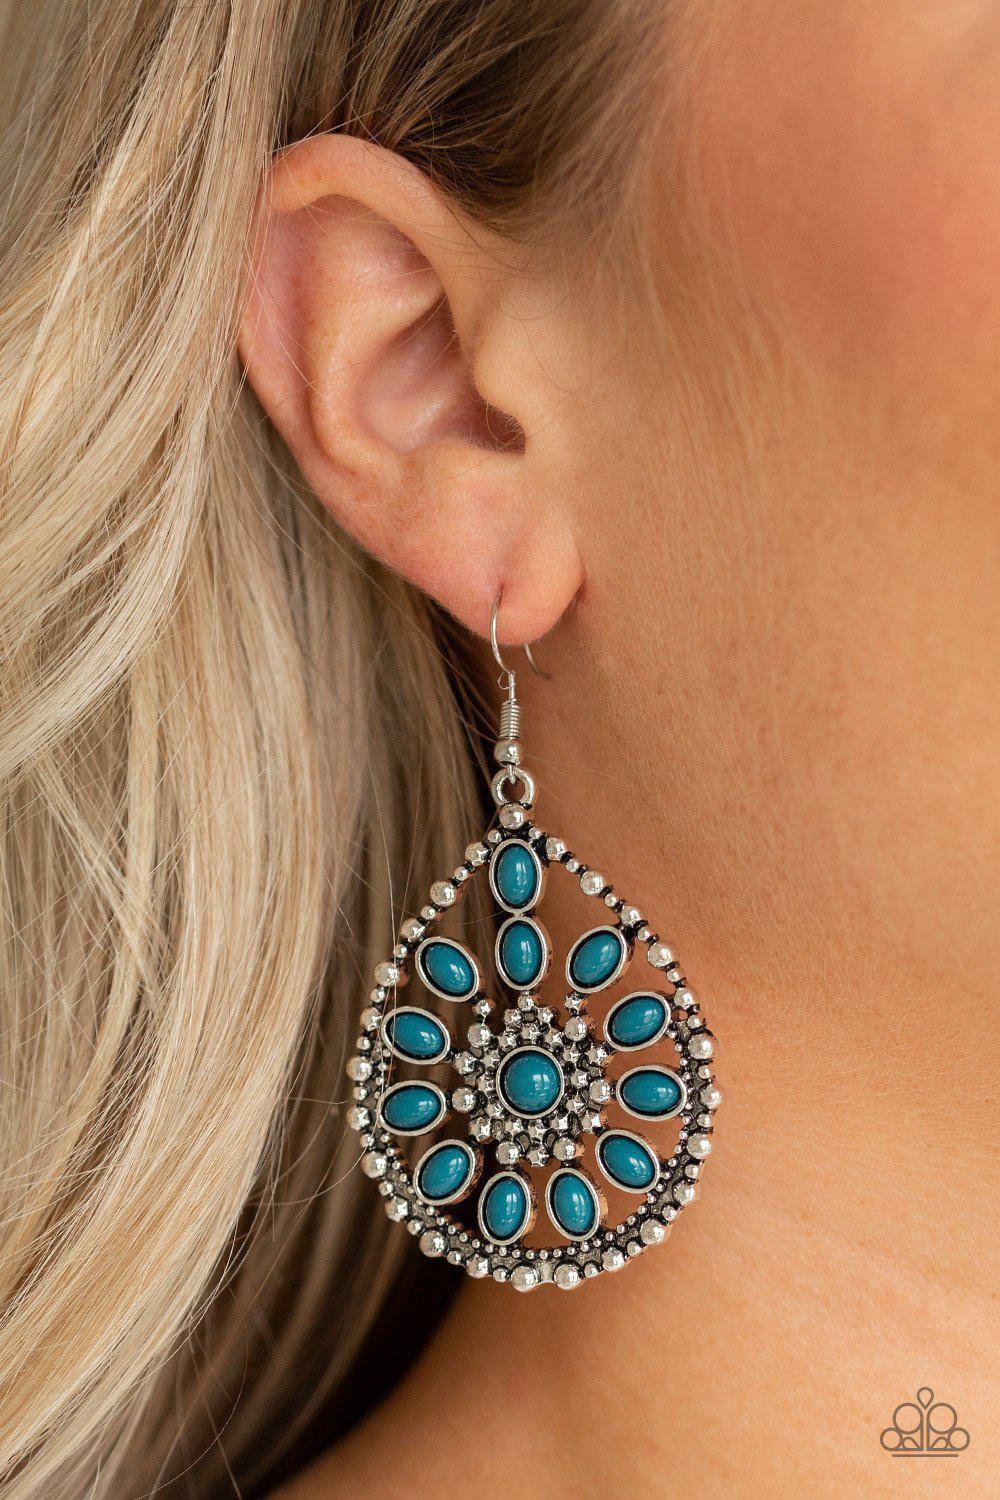 Free To Roam Blue Earrings - Paparazzi Accessories - model -CarasShop.com - $5 Jewelry by Cara Jewels